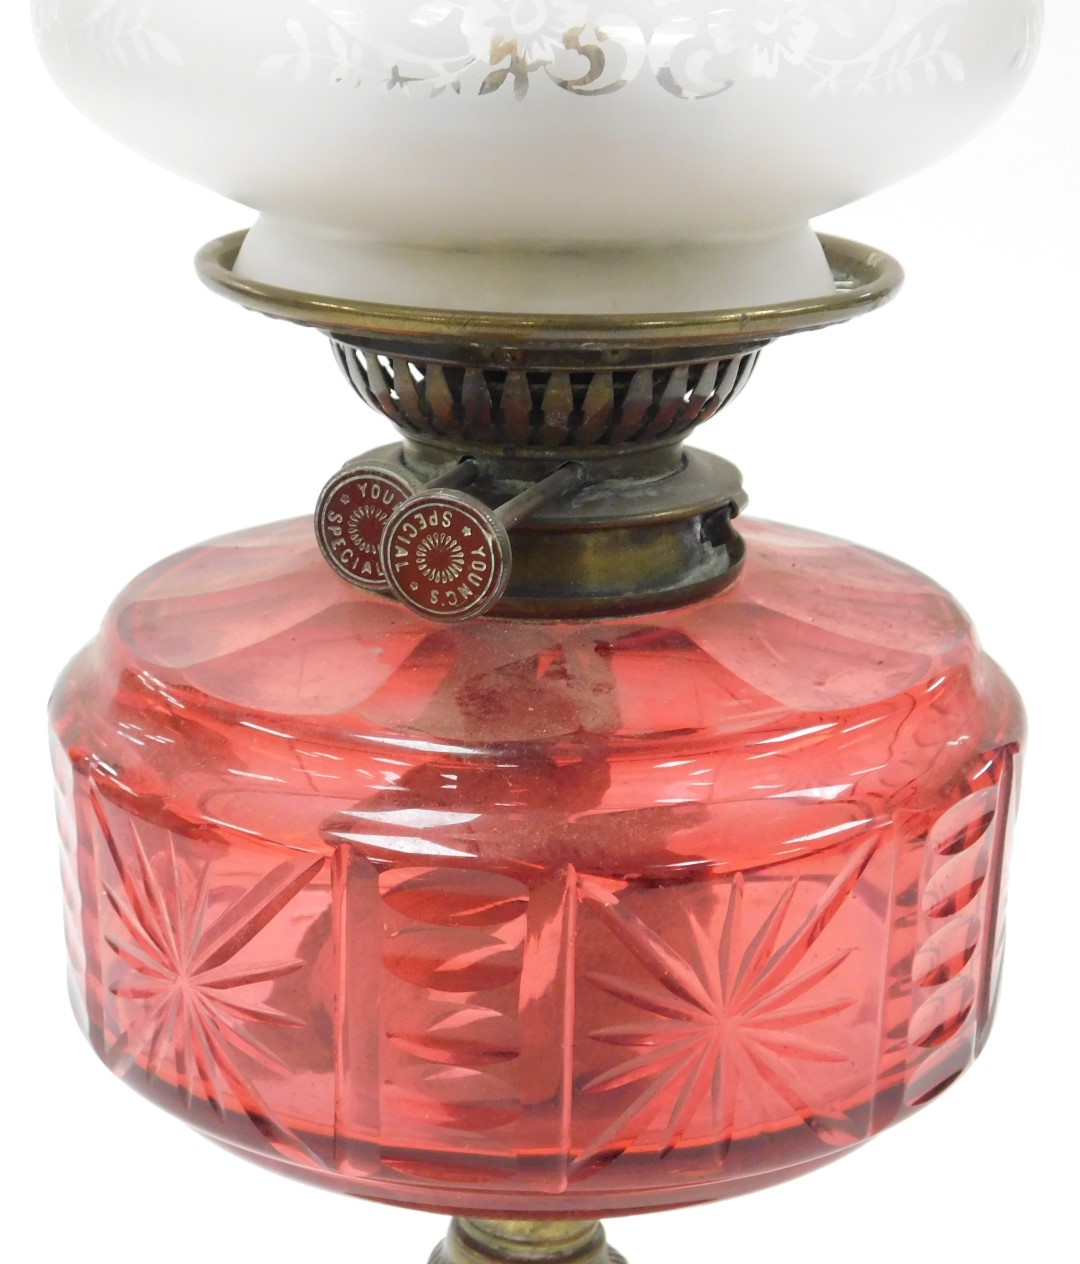 A late 19thC Young's brass oil lamp, with a cranberry glass reservoir, glass chimney and frosted to - Image 2 of 2